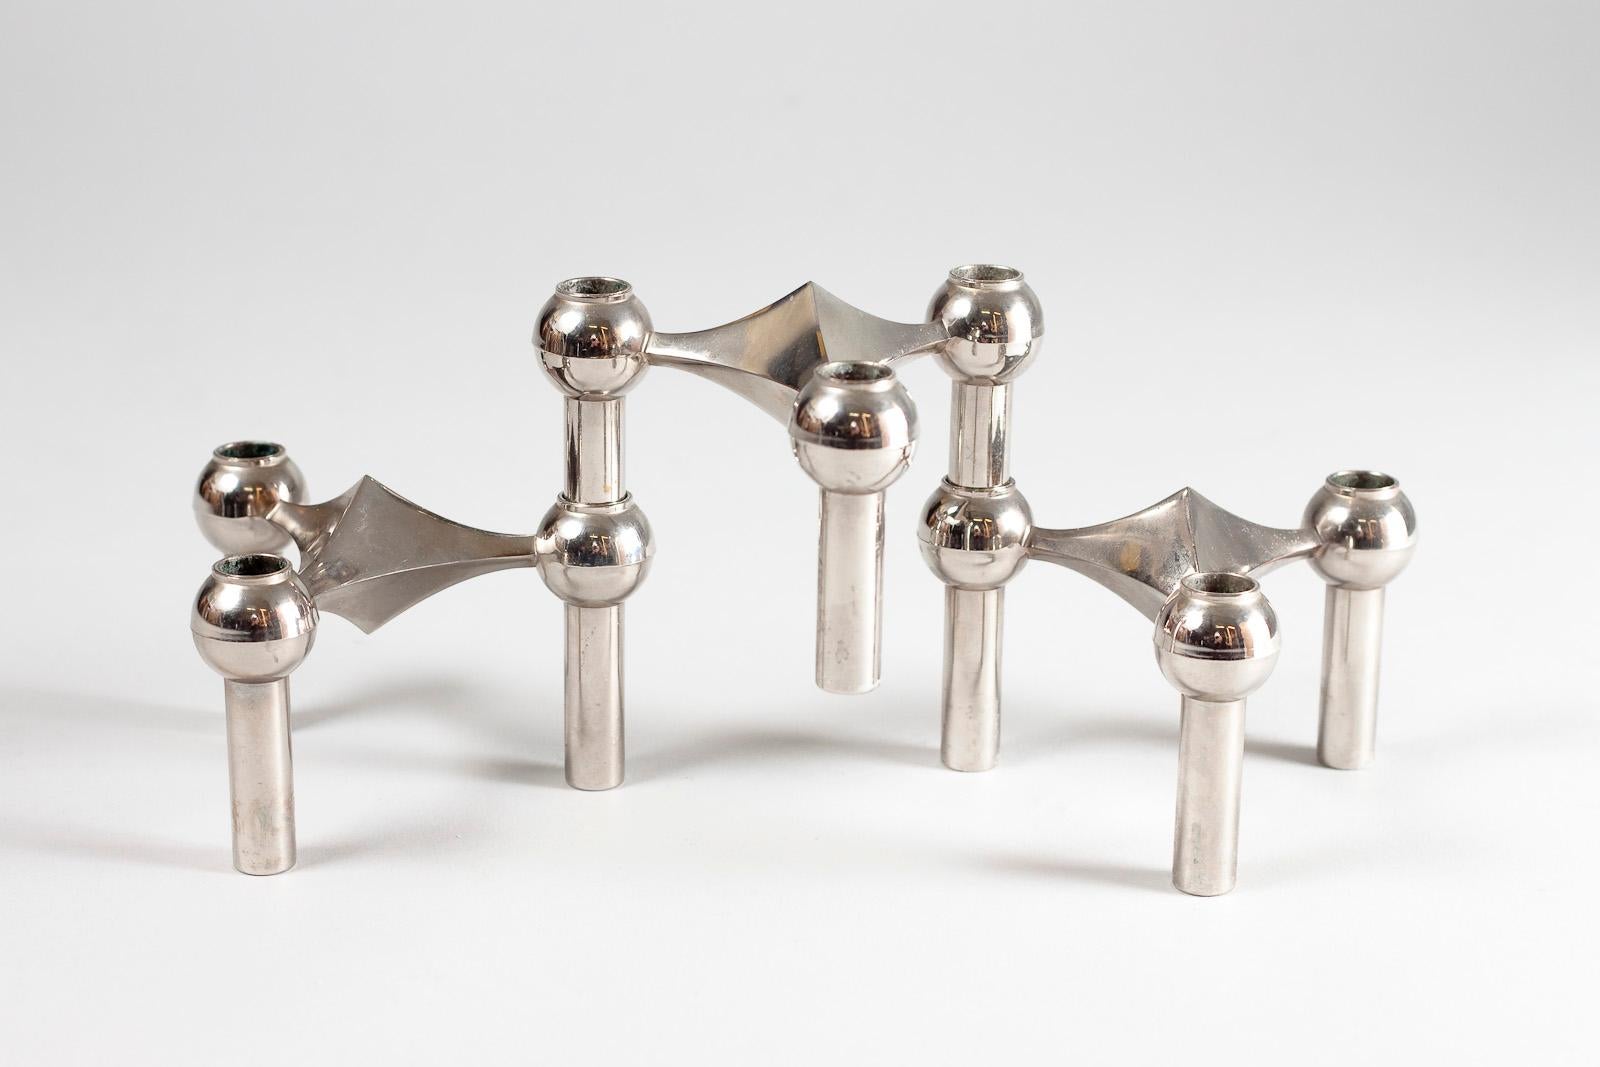 Mid-Century Modern 1960s STOFF Nagel Modular Candleholders by Werner Stoff, Denmark For Sale